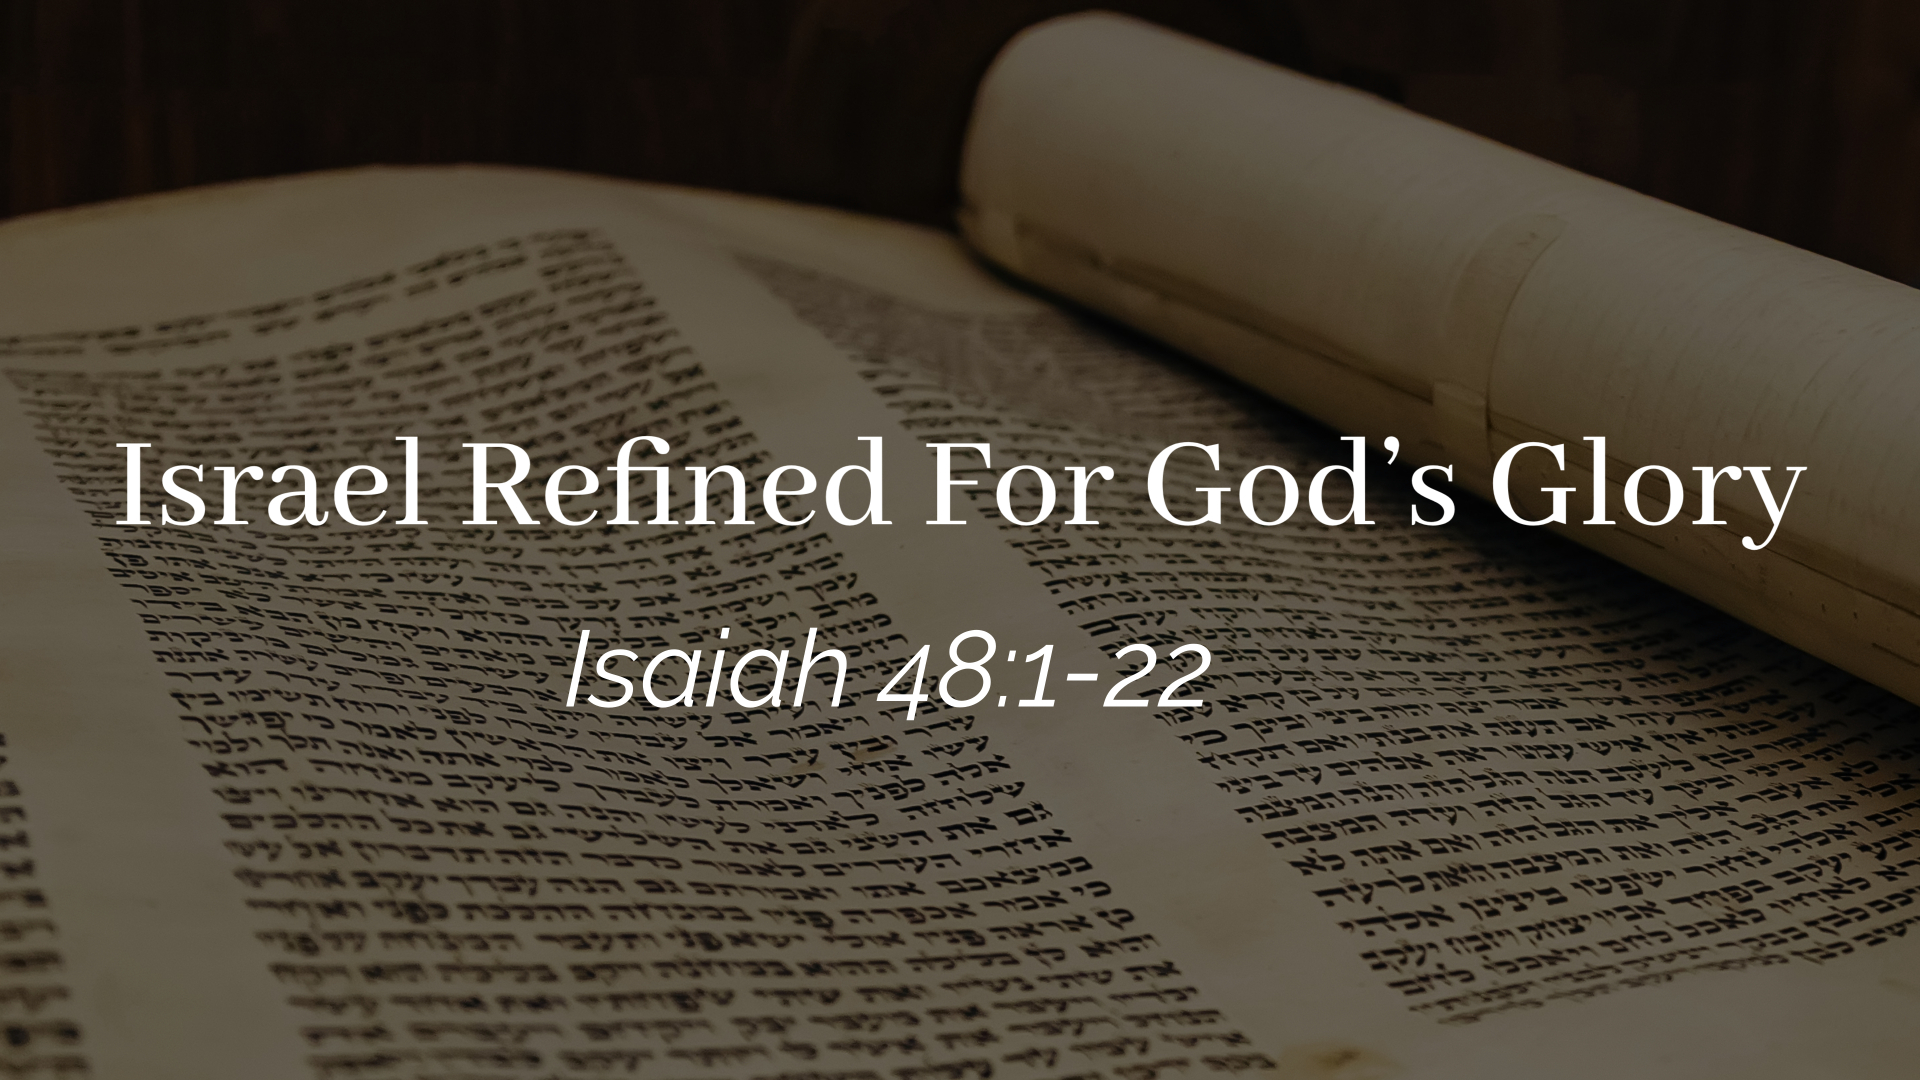 Israel Refined For God’s Glory